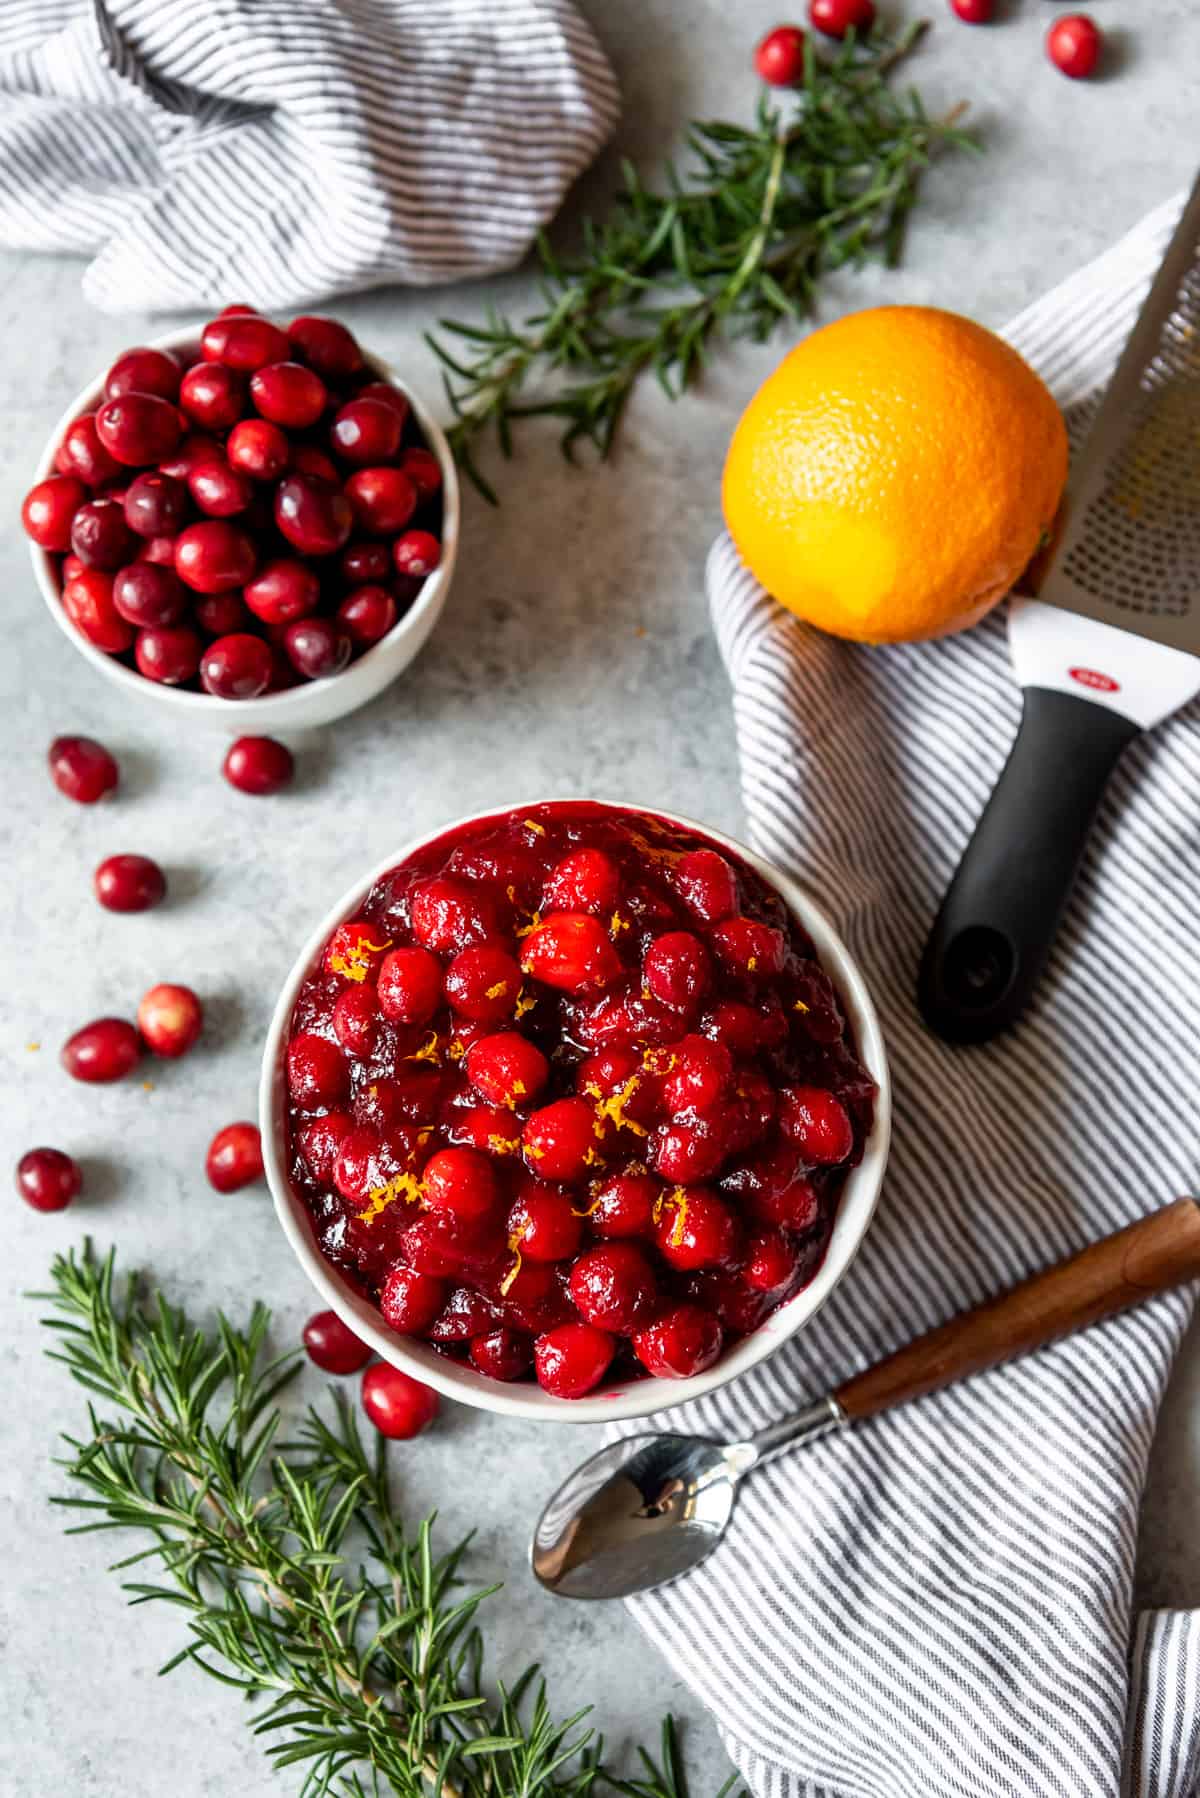 An image of a bowl of whole berry cranberry sauce in a white serving bowl, garnished with whole fresh cranberries and sprigs of rosemary.